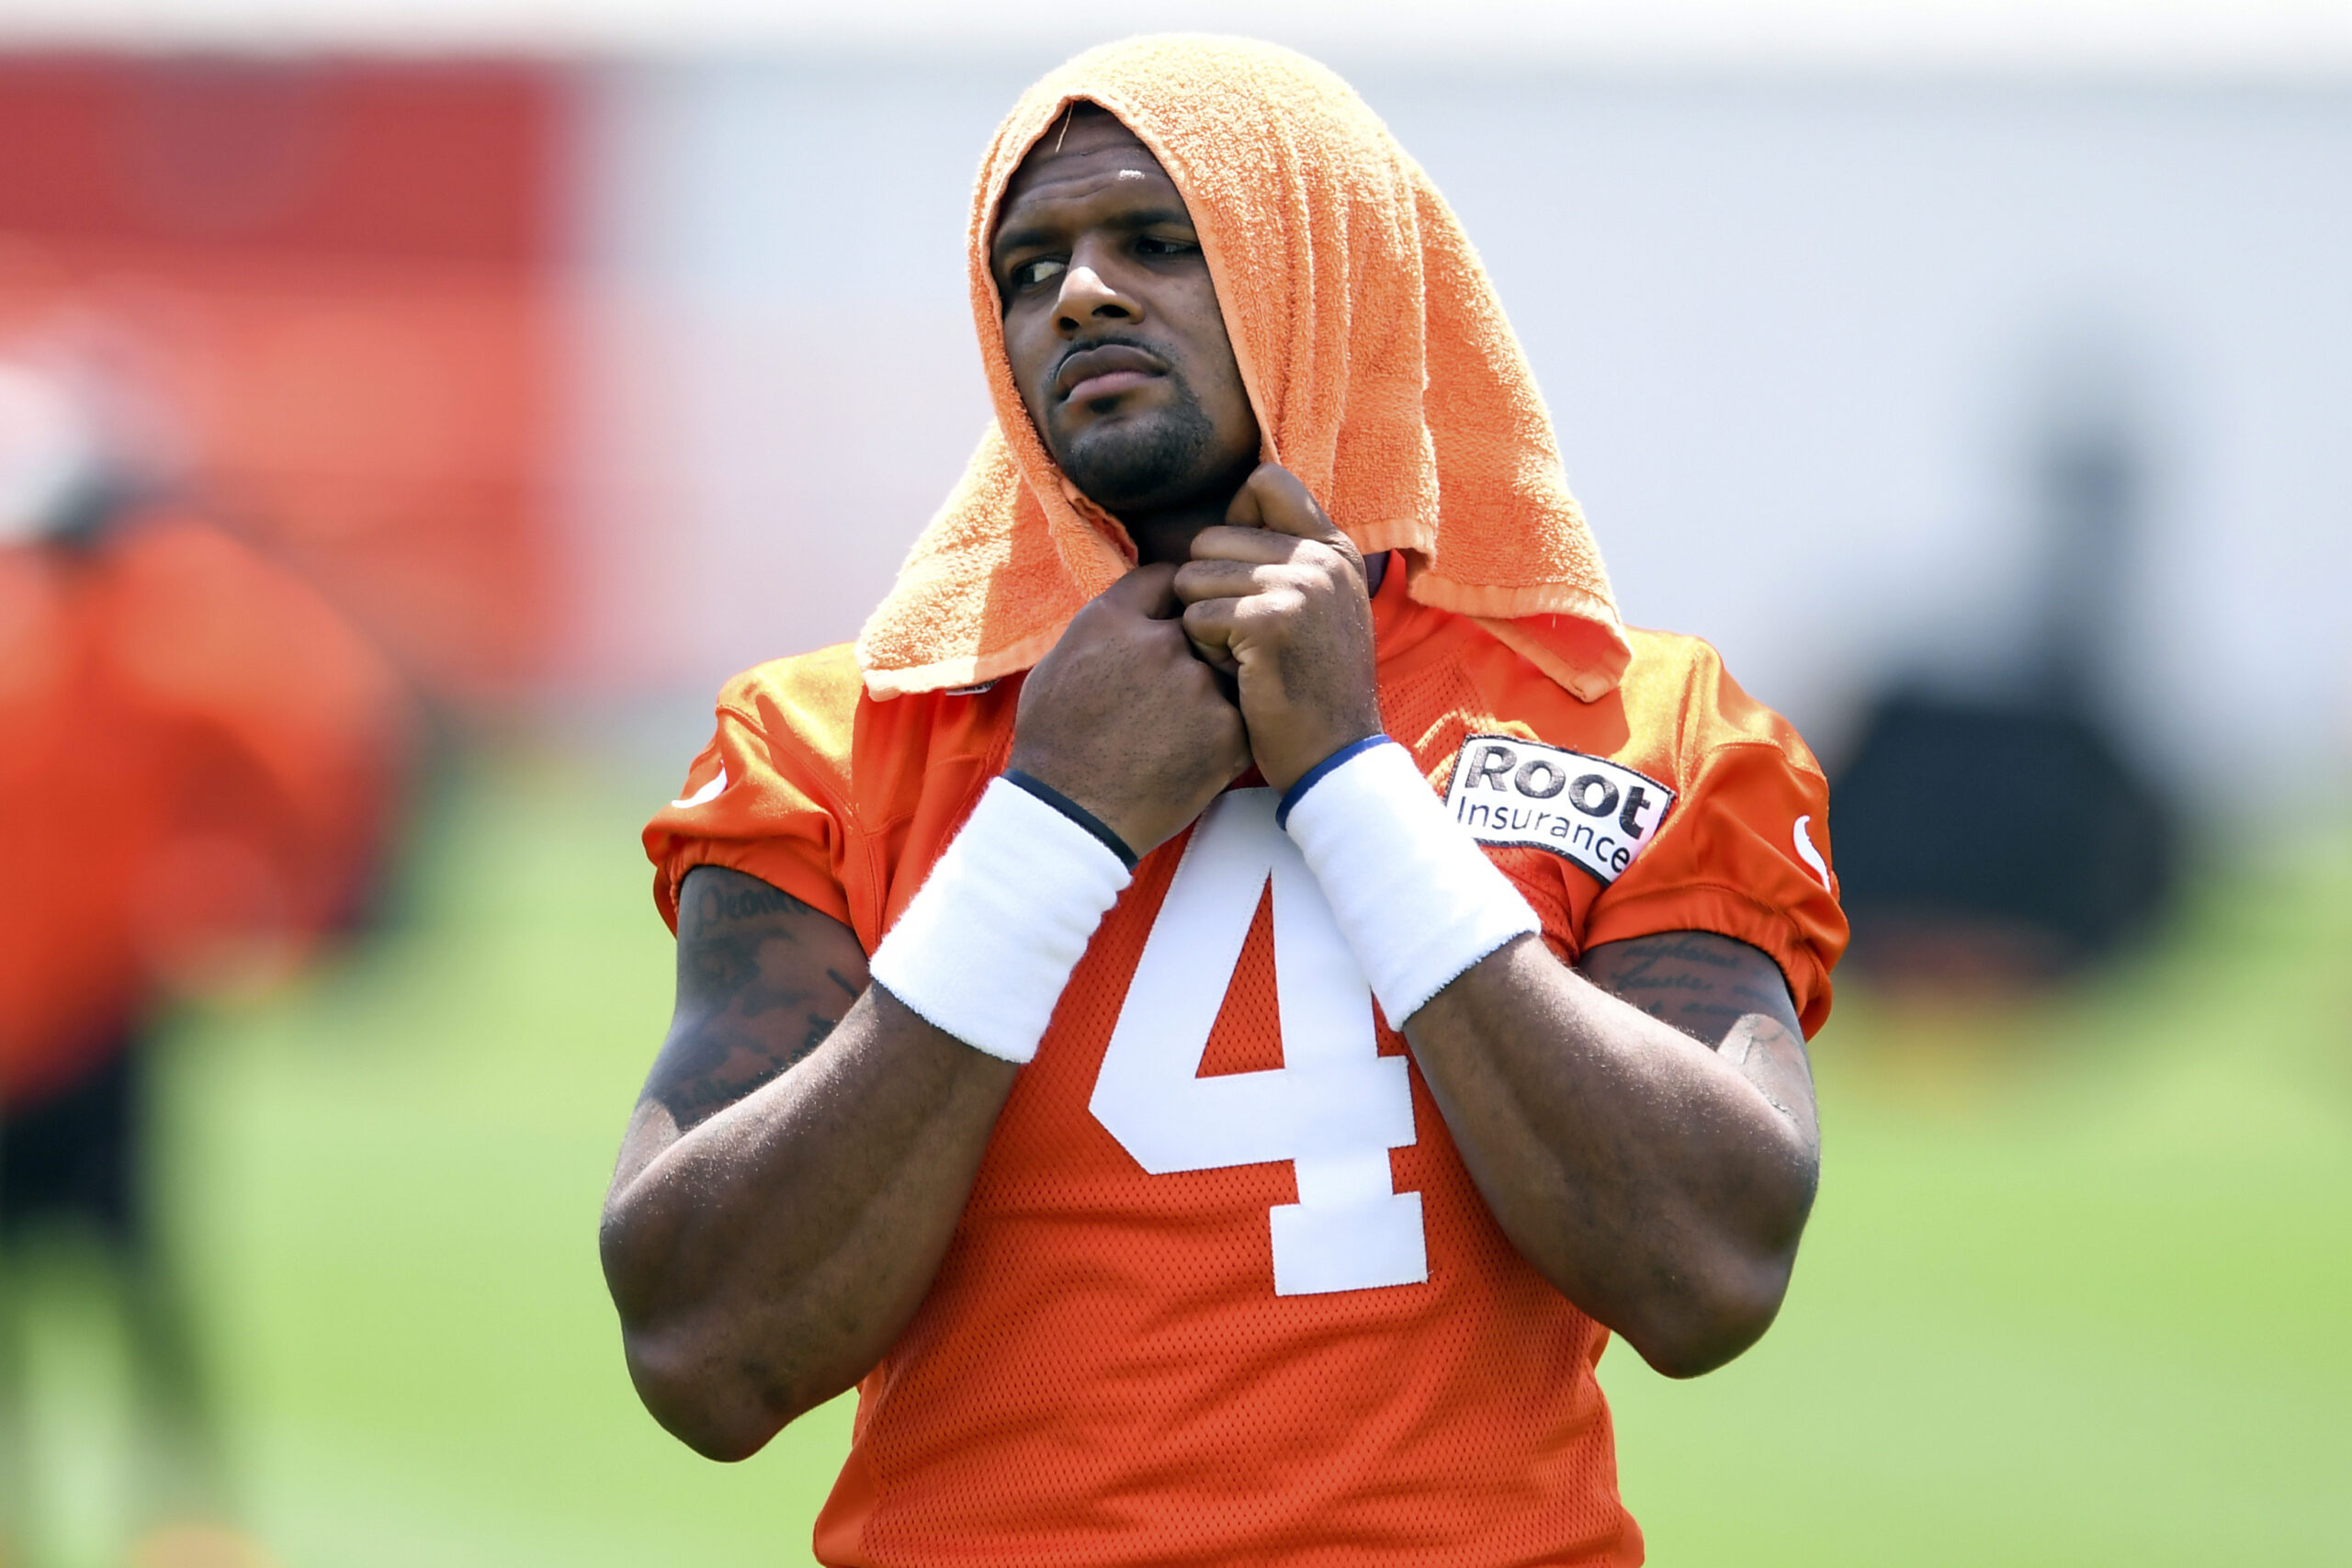 FILE - Cleveland Browns quarterback Deshaun Watson looks on during the NFL football team's training camp, Thursday, July 28, 2022, in Berea, Ohio. Watson was suspended without pay for six games Monday, Aug. 1, 2022, for violating the NFL's personal conduct policy following accusations of sexual misconduct made against him by two dozen women in Texas, two people familiar with the decision said. (AP Photo/Nick Cammett, File)